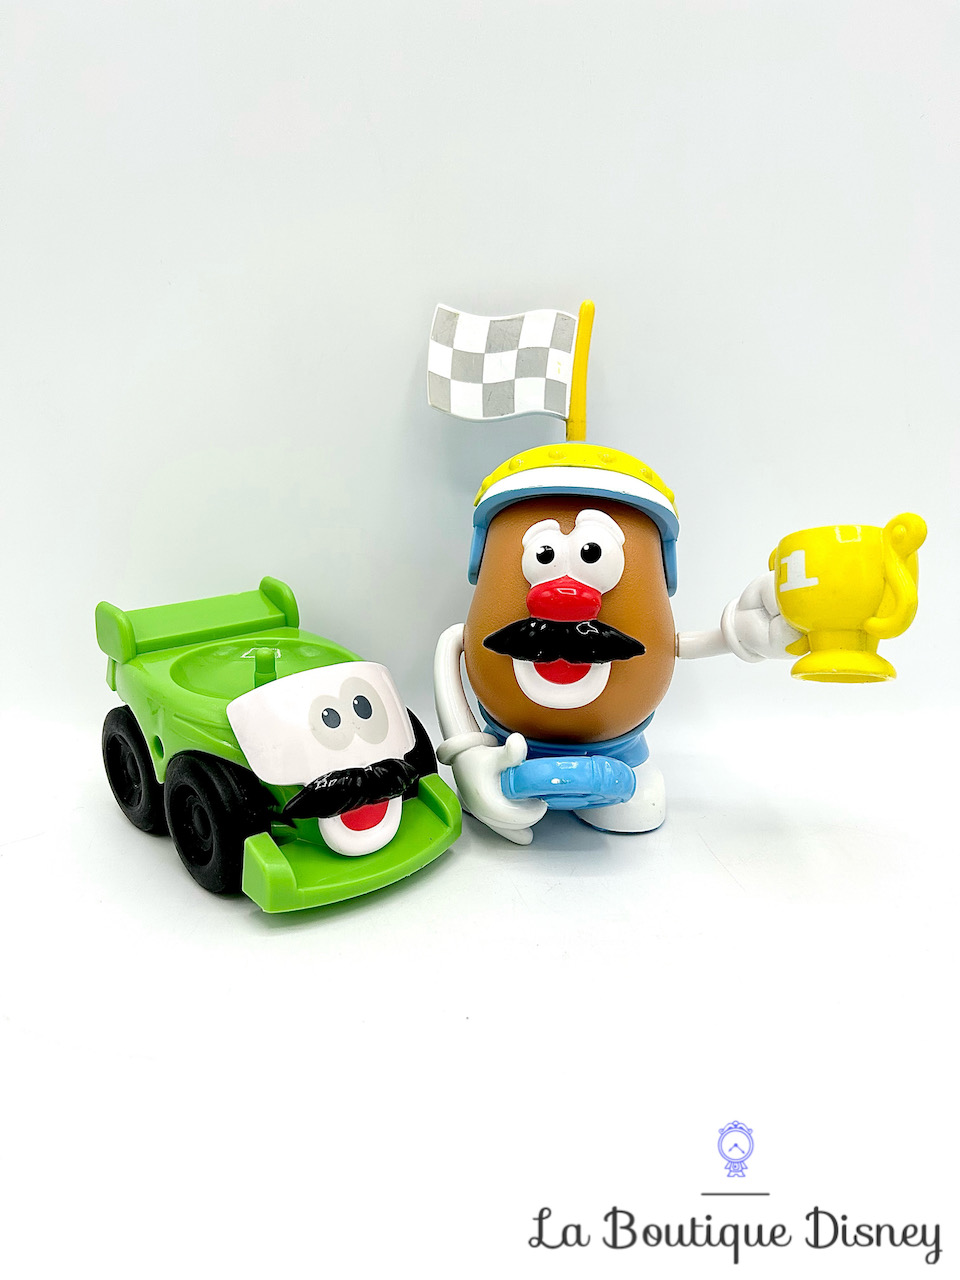 jouet-mr-patate-speed-tater-mr-potato-head-disney-hasbro-toy-story-playskool-little-taters-big-adventures-karting-voiture-coupe-1